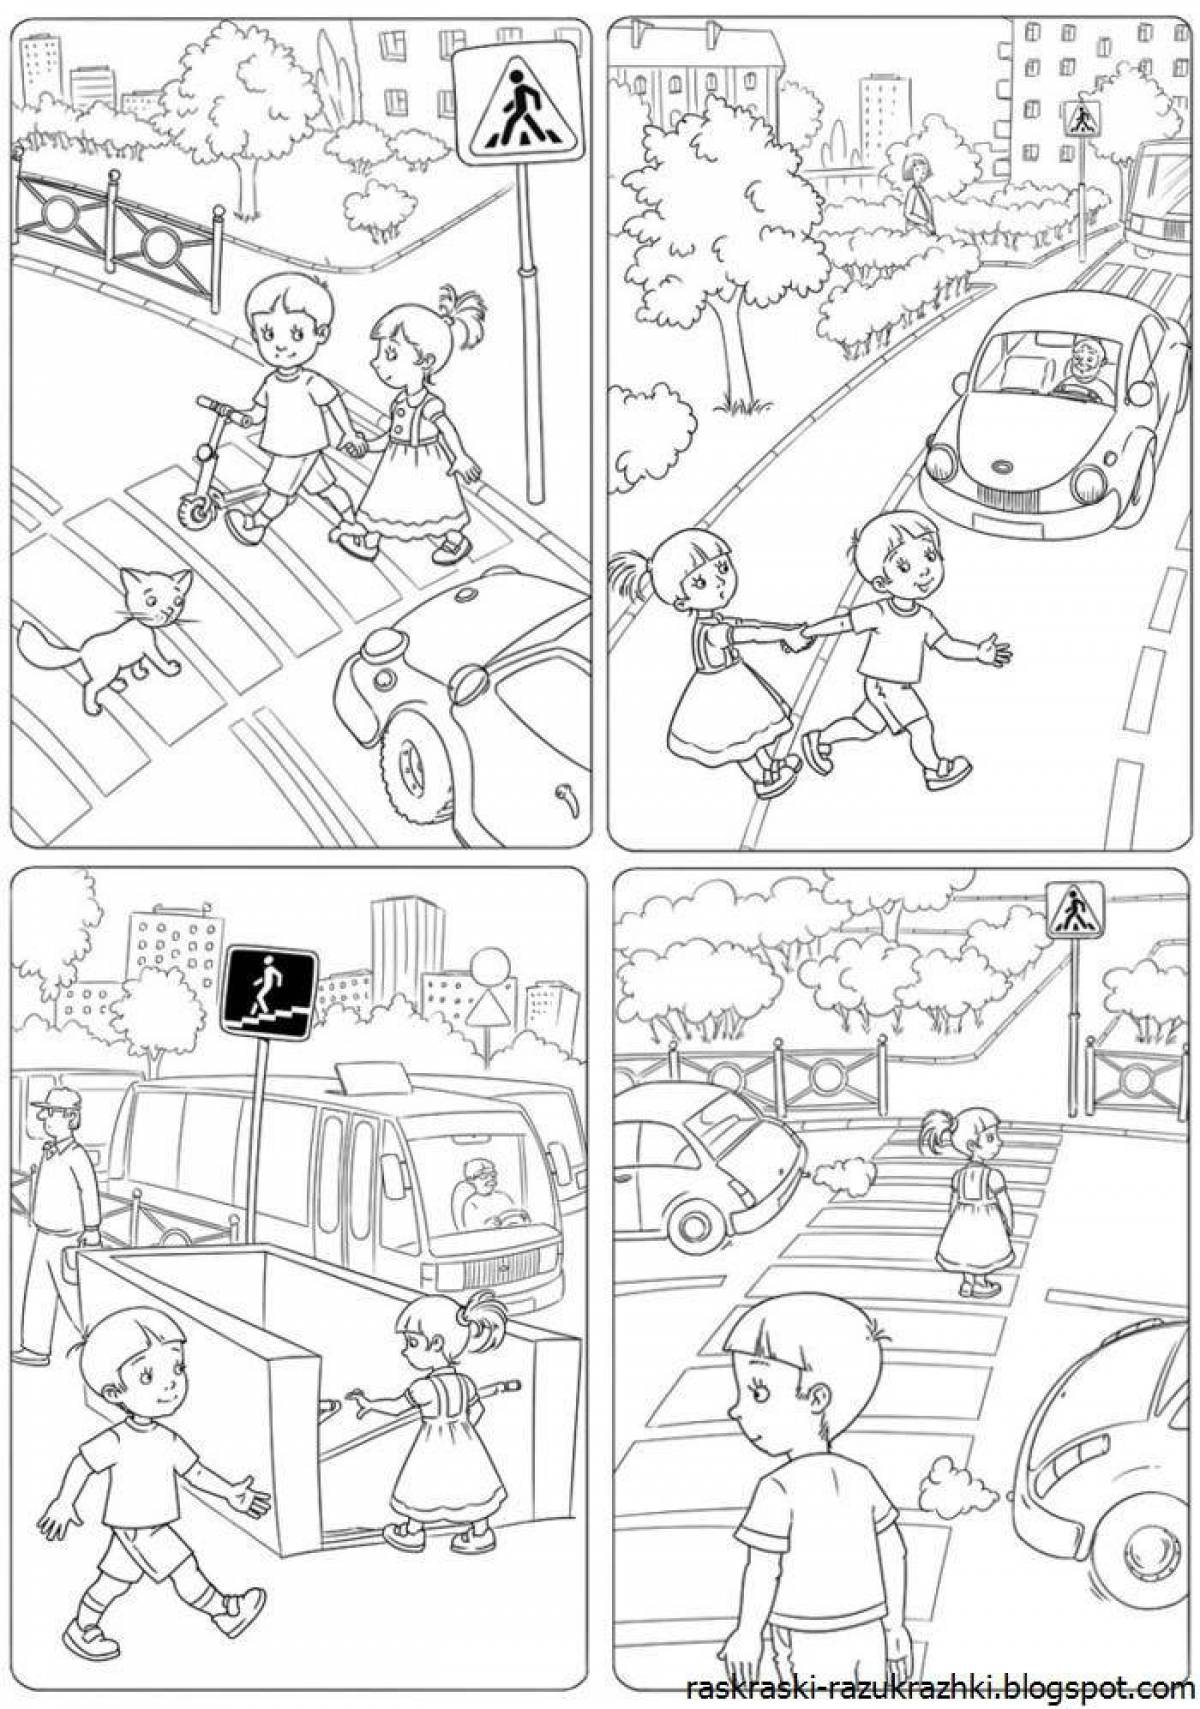 Colorful rules of the road coloring pages for kids